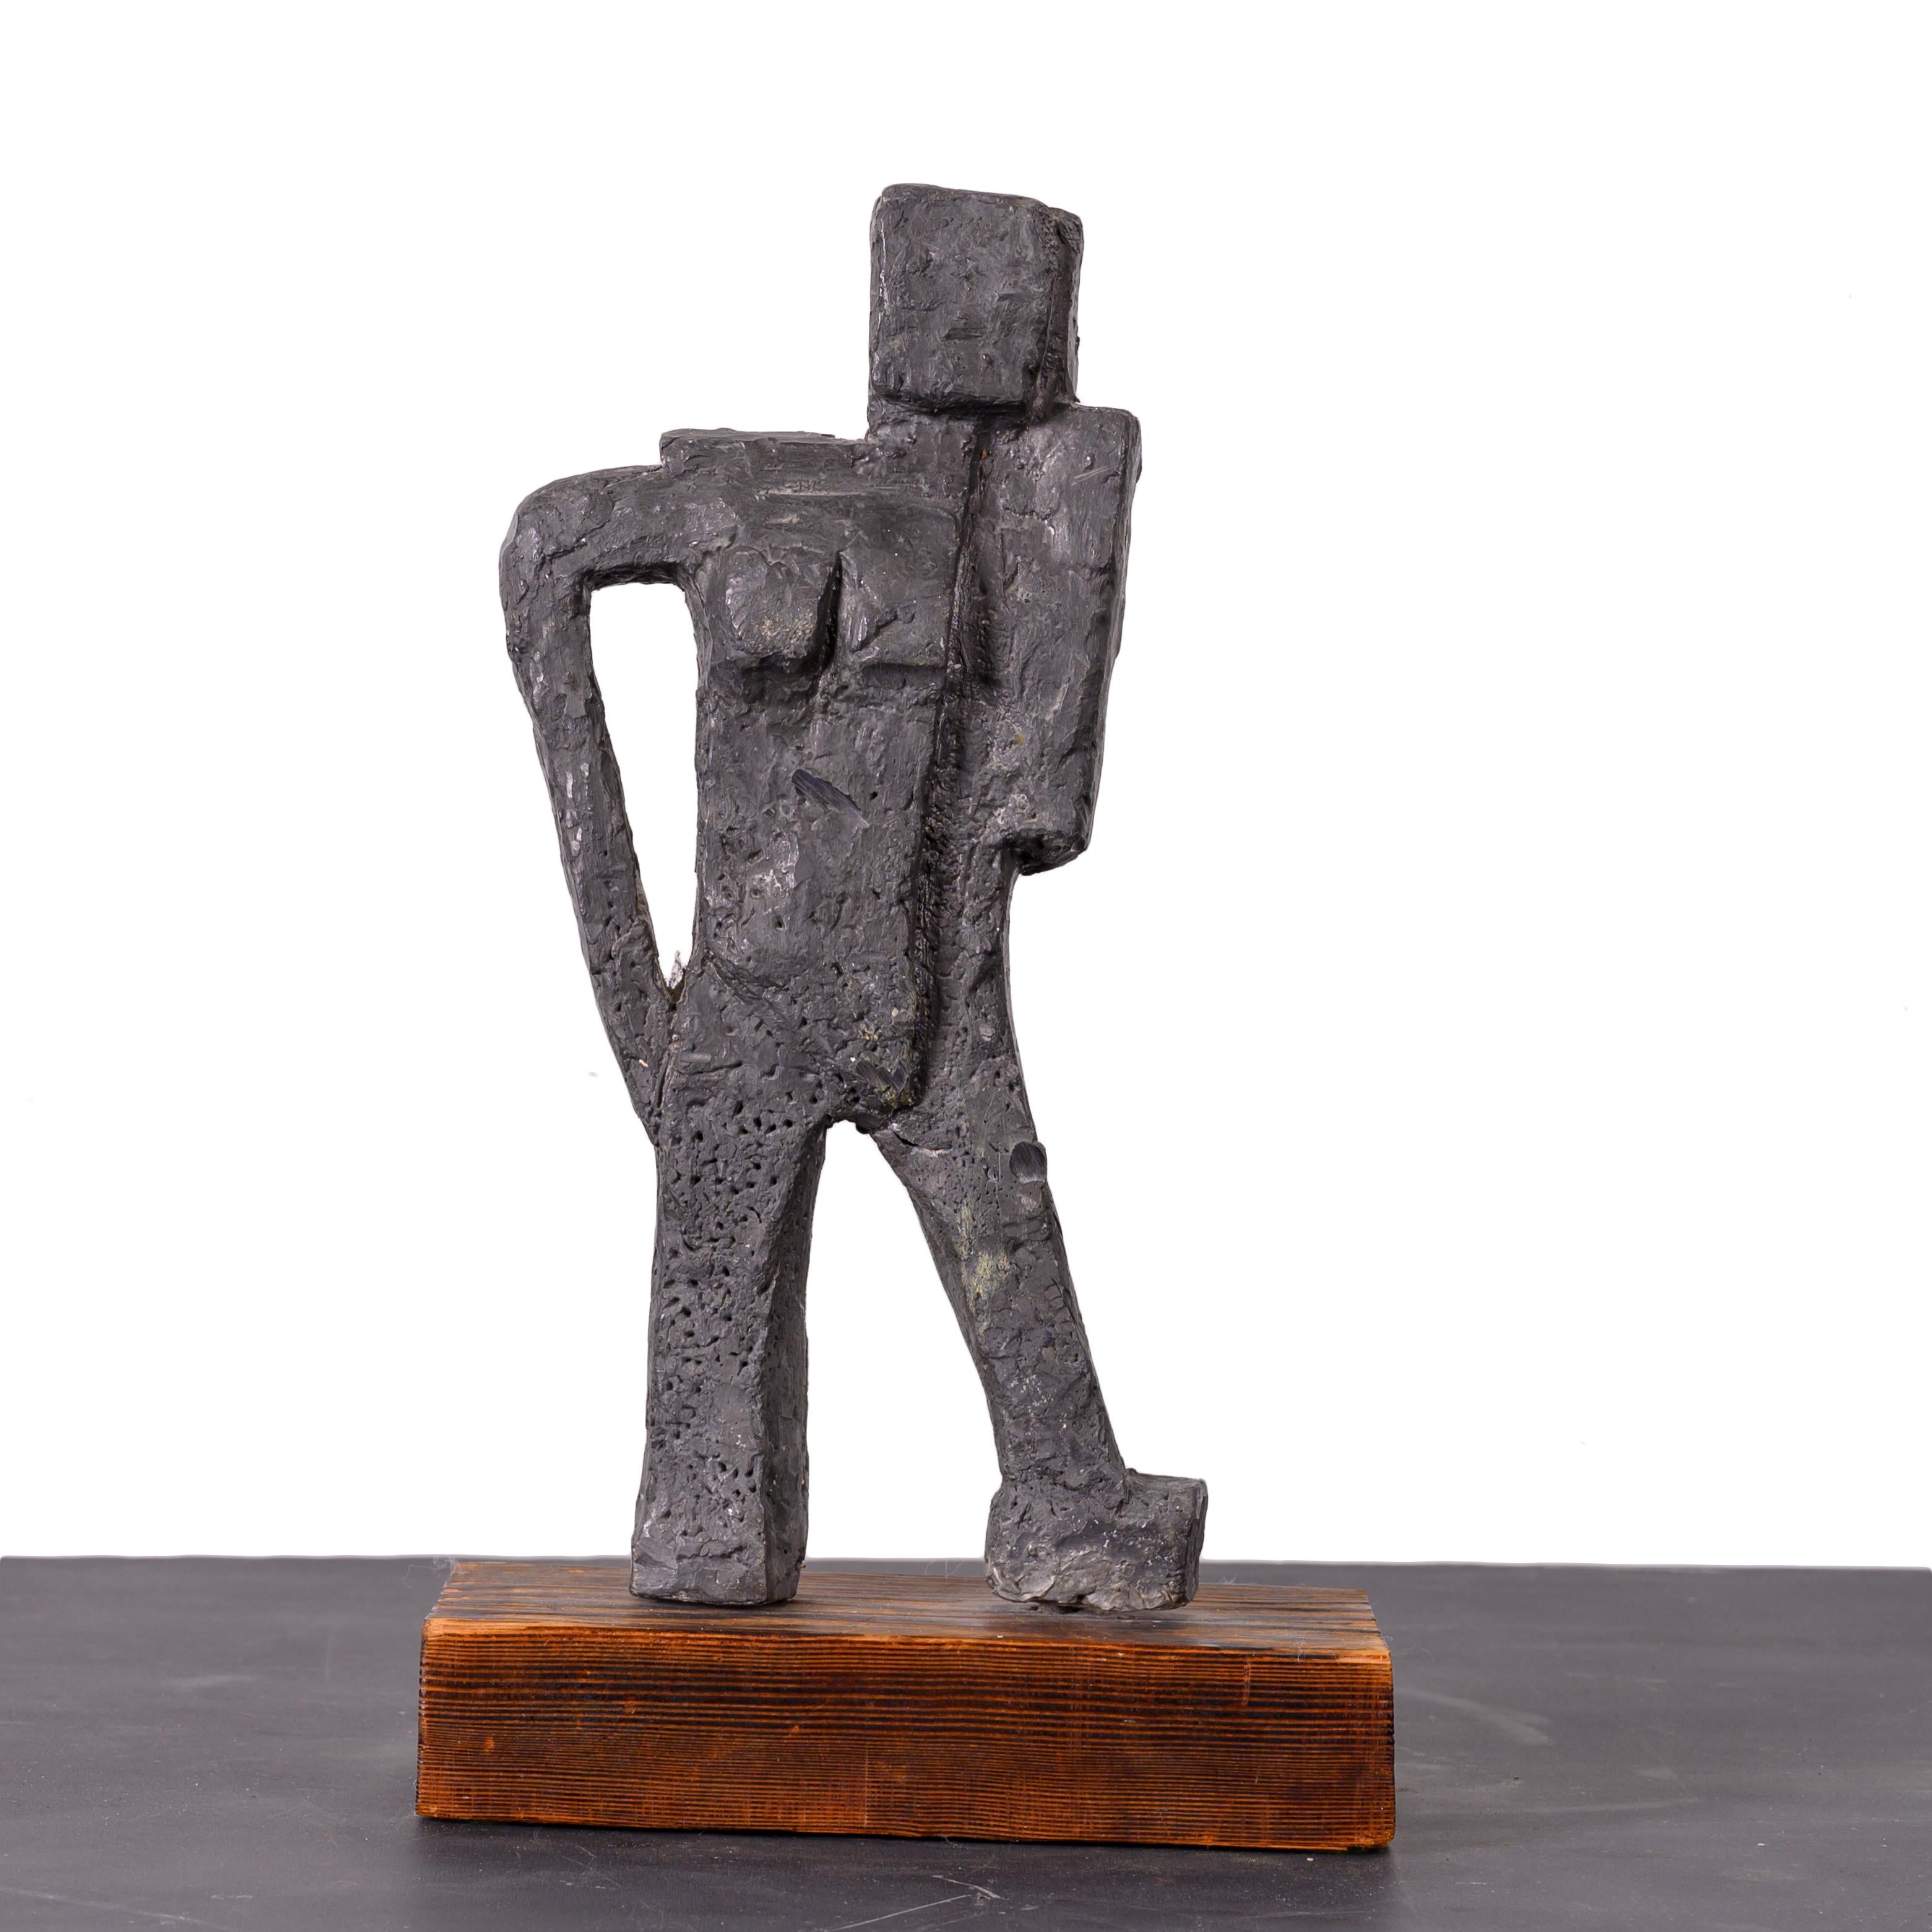 A brutalist lead figural sculpture on pine base.

7 ¼ inches wide by 4 ½ inches deep by 14 ¼ inches tall